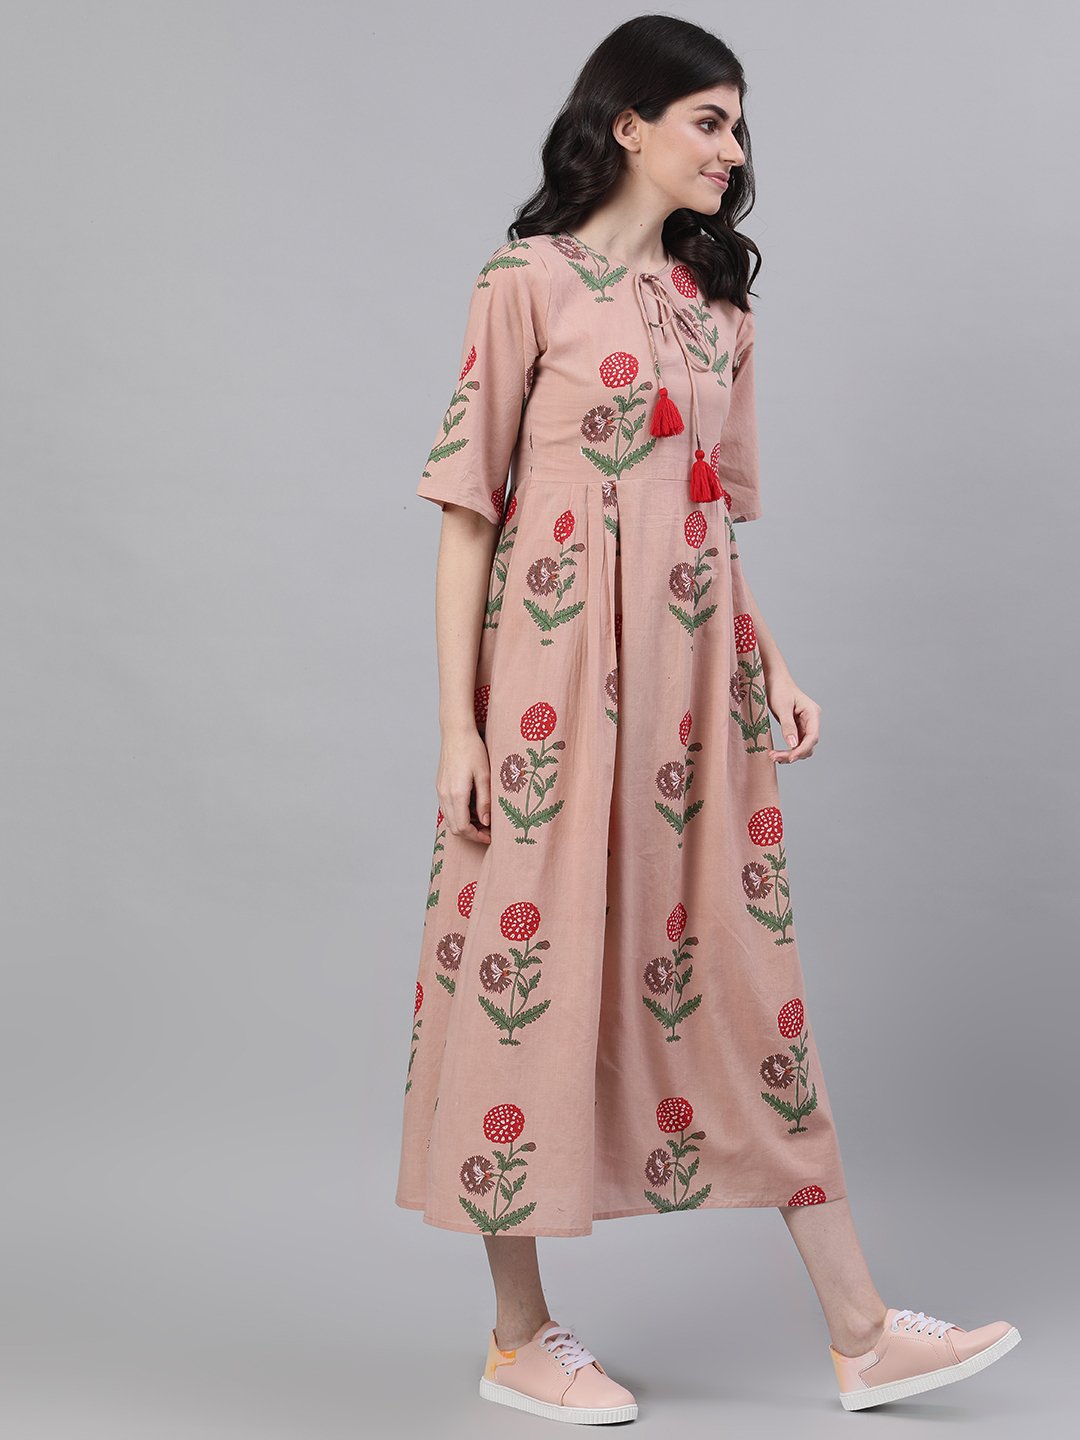 Women's Dusty Pink Floral Printed Tie-Up Neck Cotton Maxi Dress - Nayo Clothing